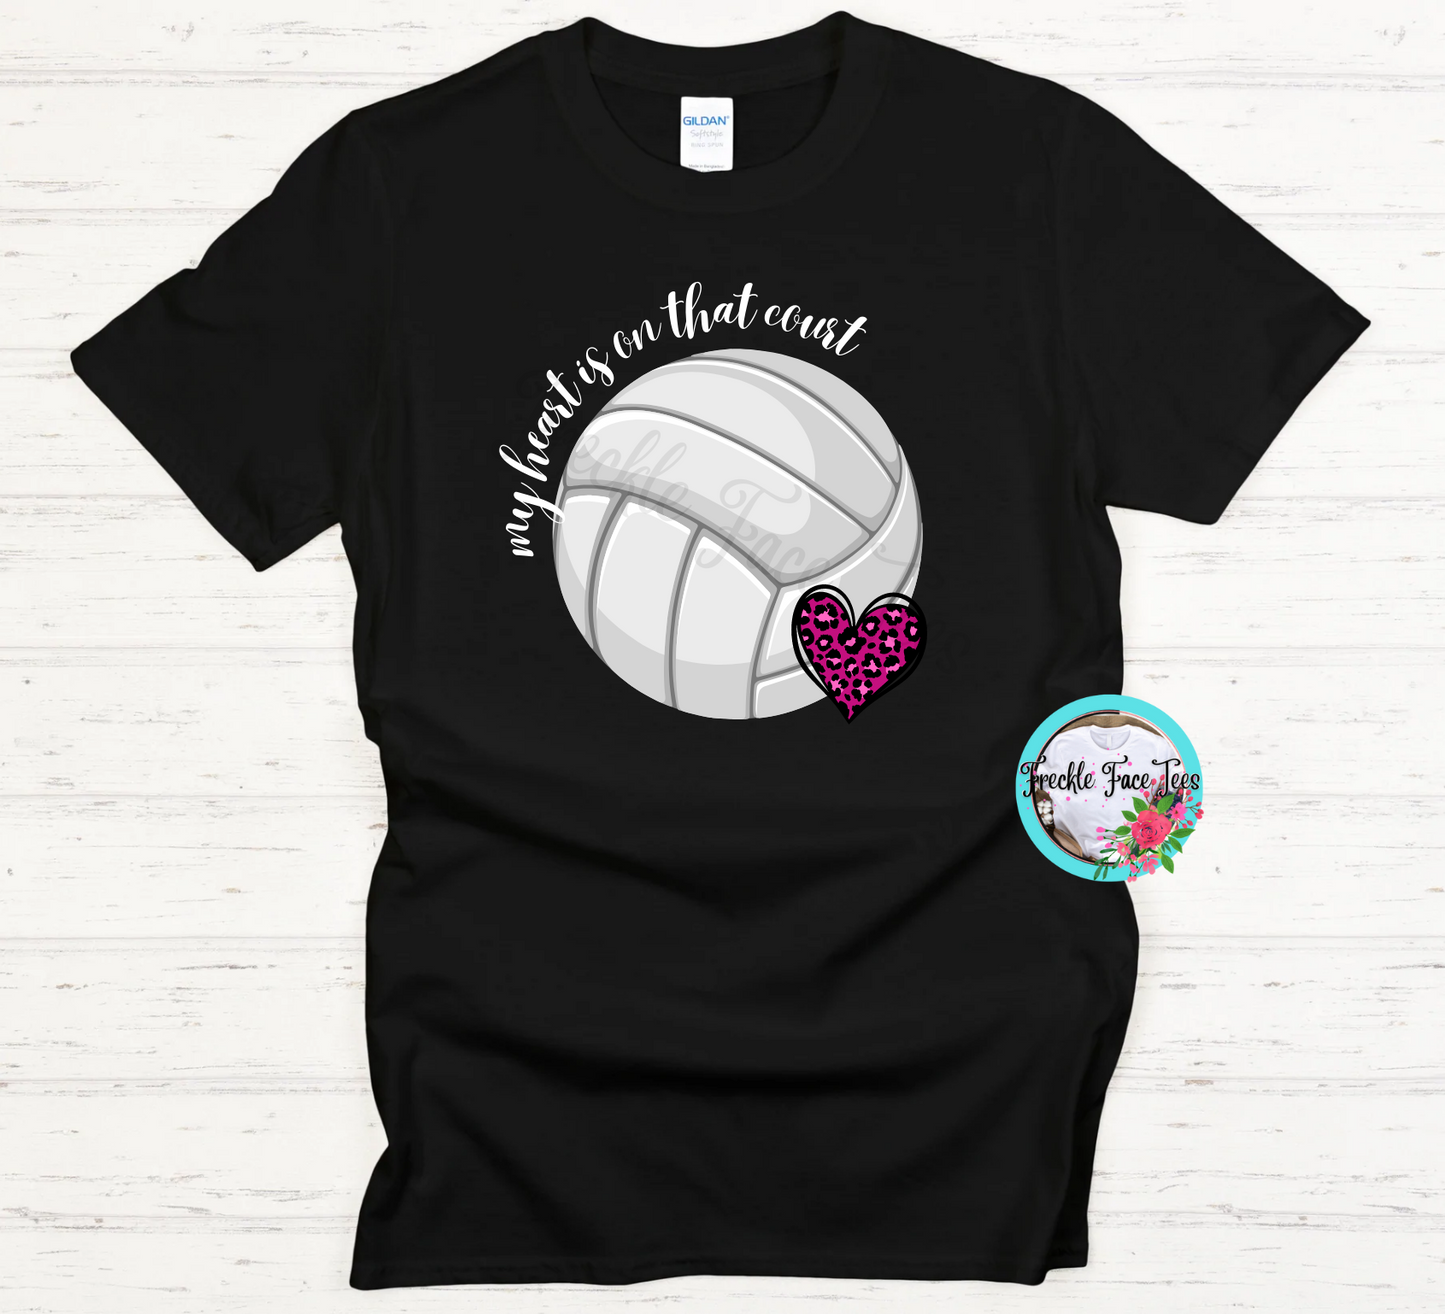 My Heart is on that court - Volleyball